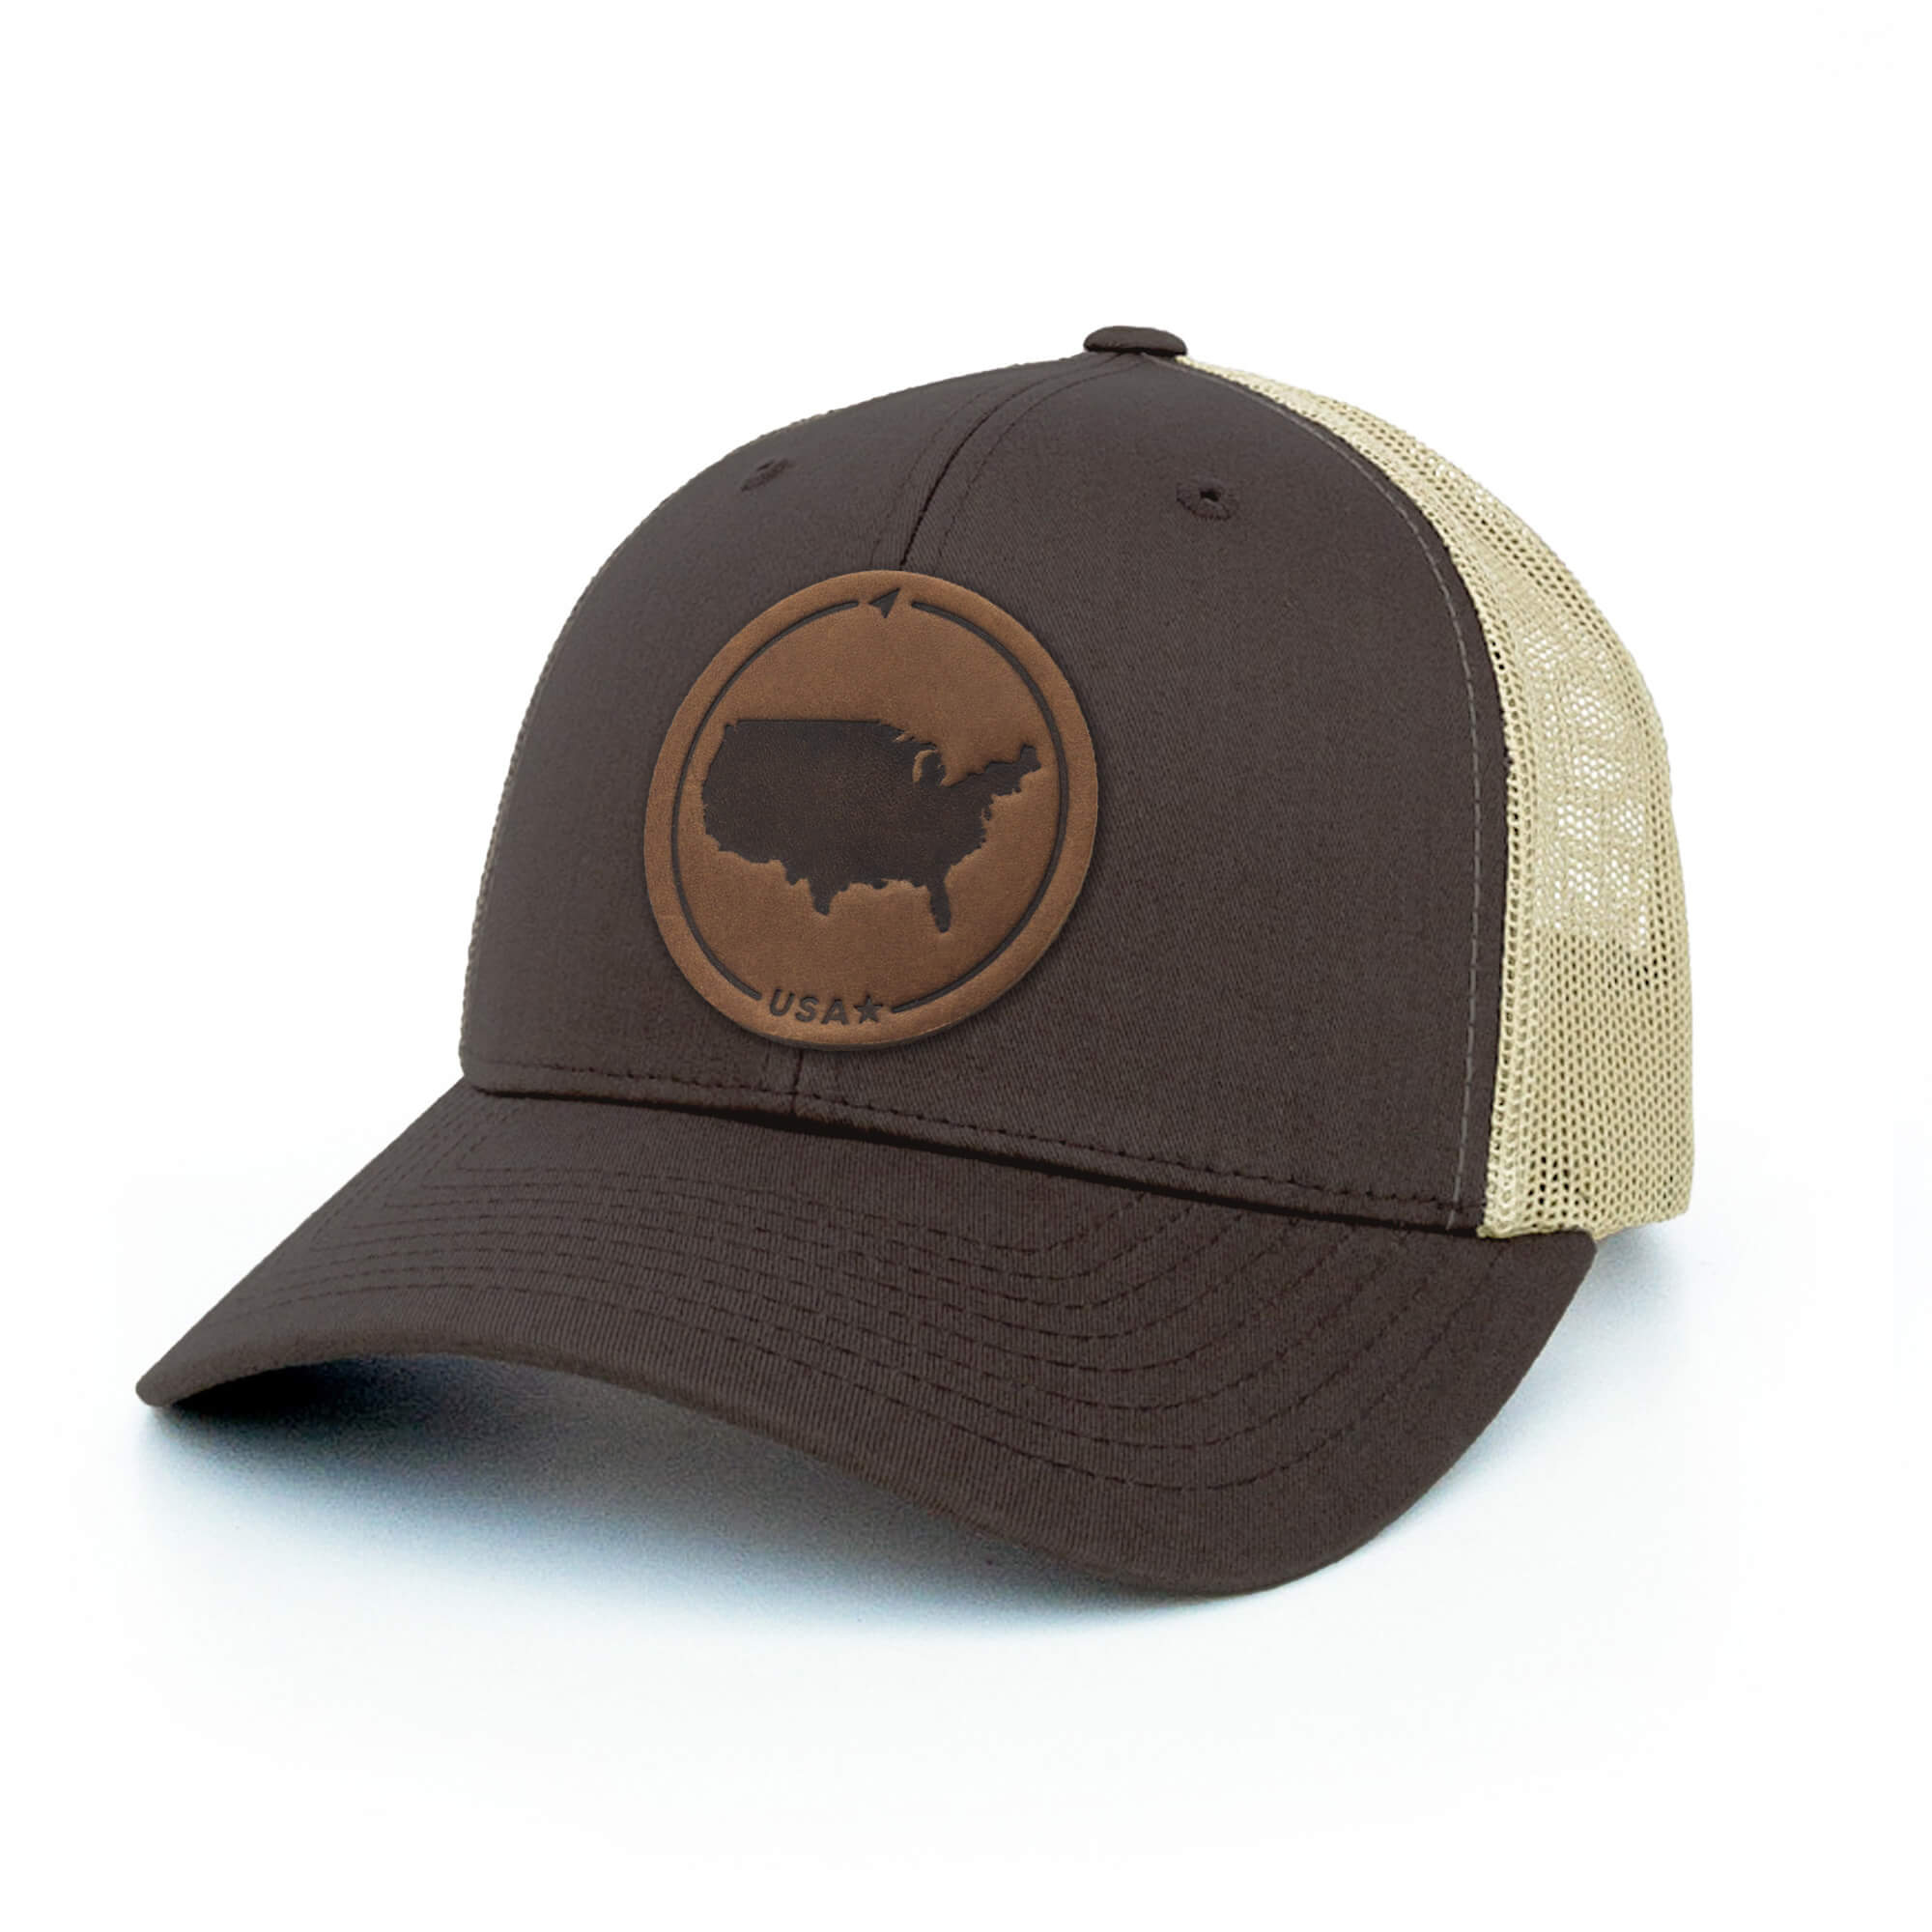 Brown and khaki trucker hat with full-grain leather patch of USA | BLACK-003-001, CHARC-003-001, NAVY-003-001, HGREY-003-001, MOSS-003-001, BROWN-003-001